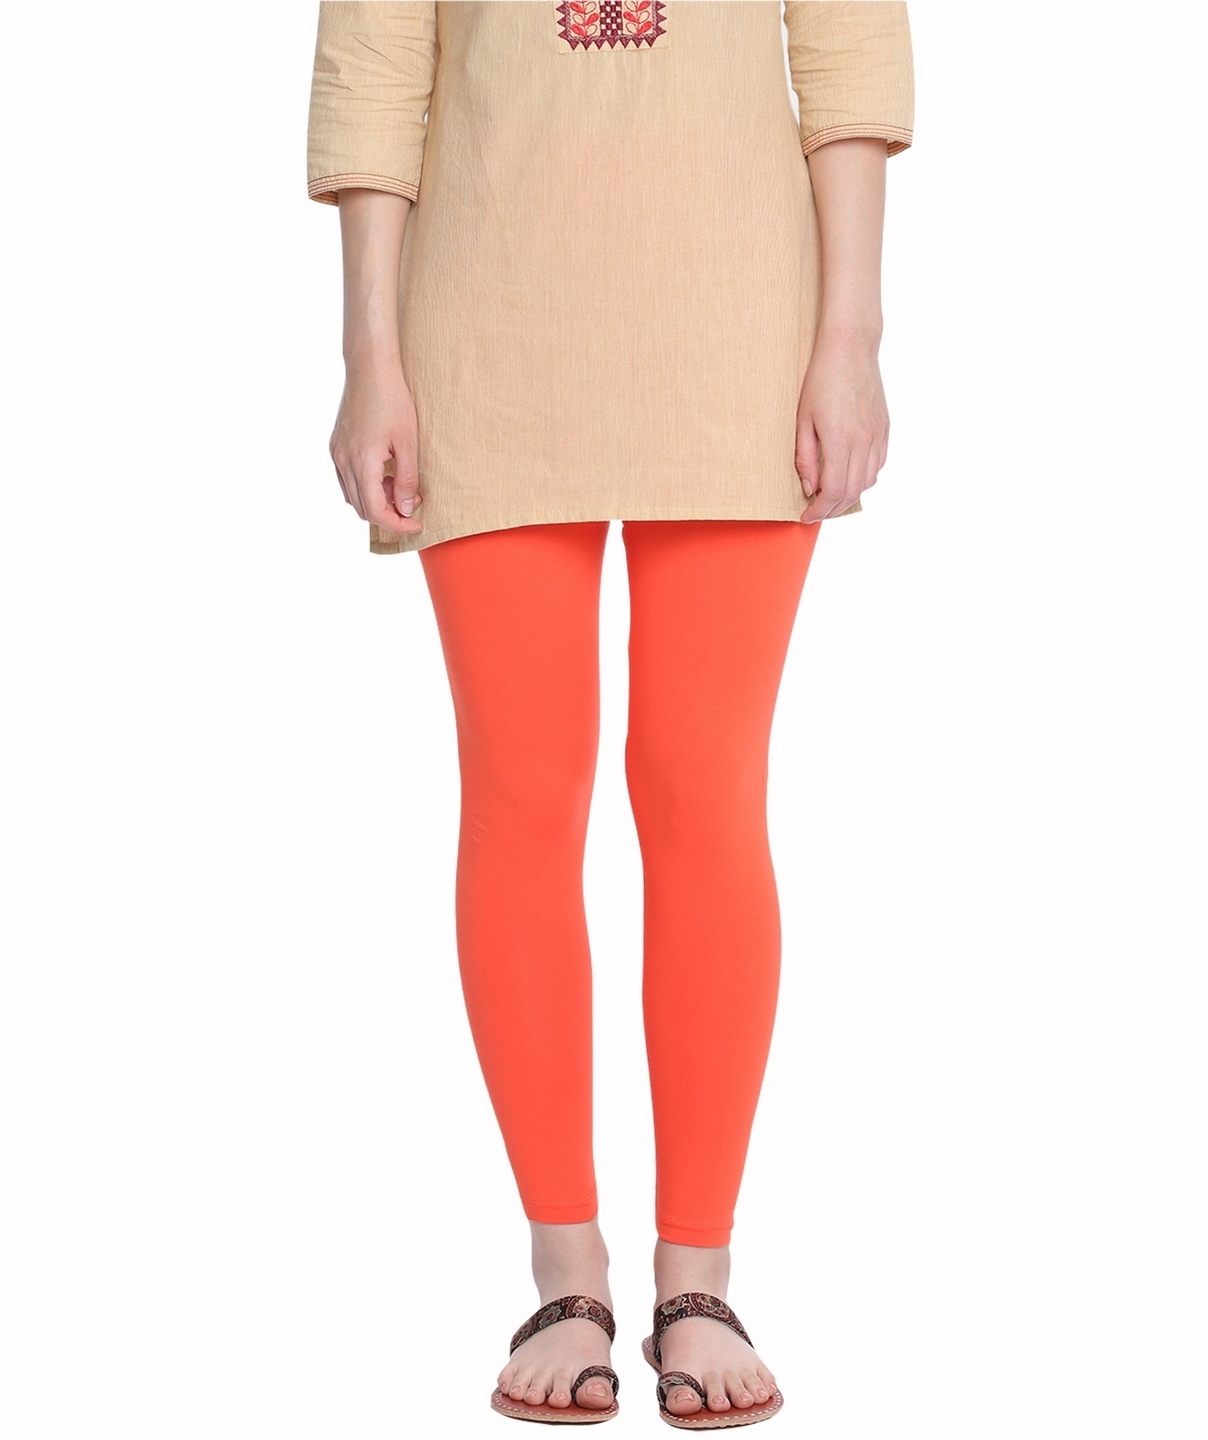 Buy Dollar Missy Women's Cotton Slim Fit Attractive White And Mango Color Ankle  Length Leggings Online at Low Prices in India - Paytmmall.com